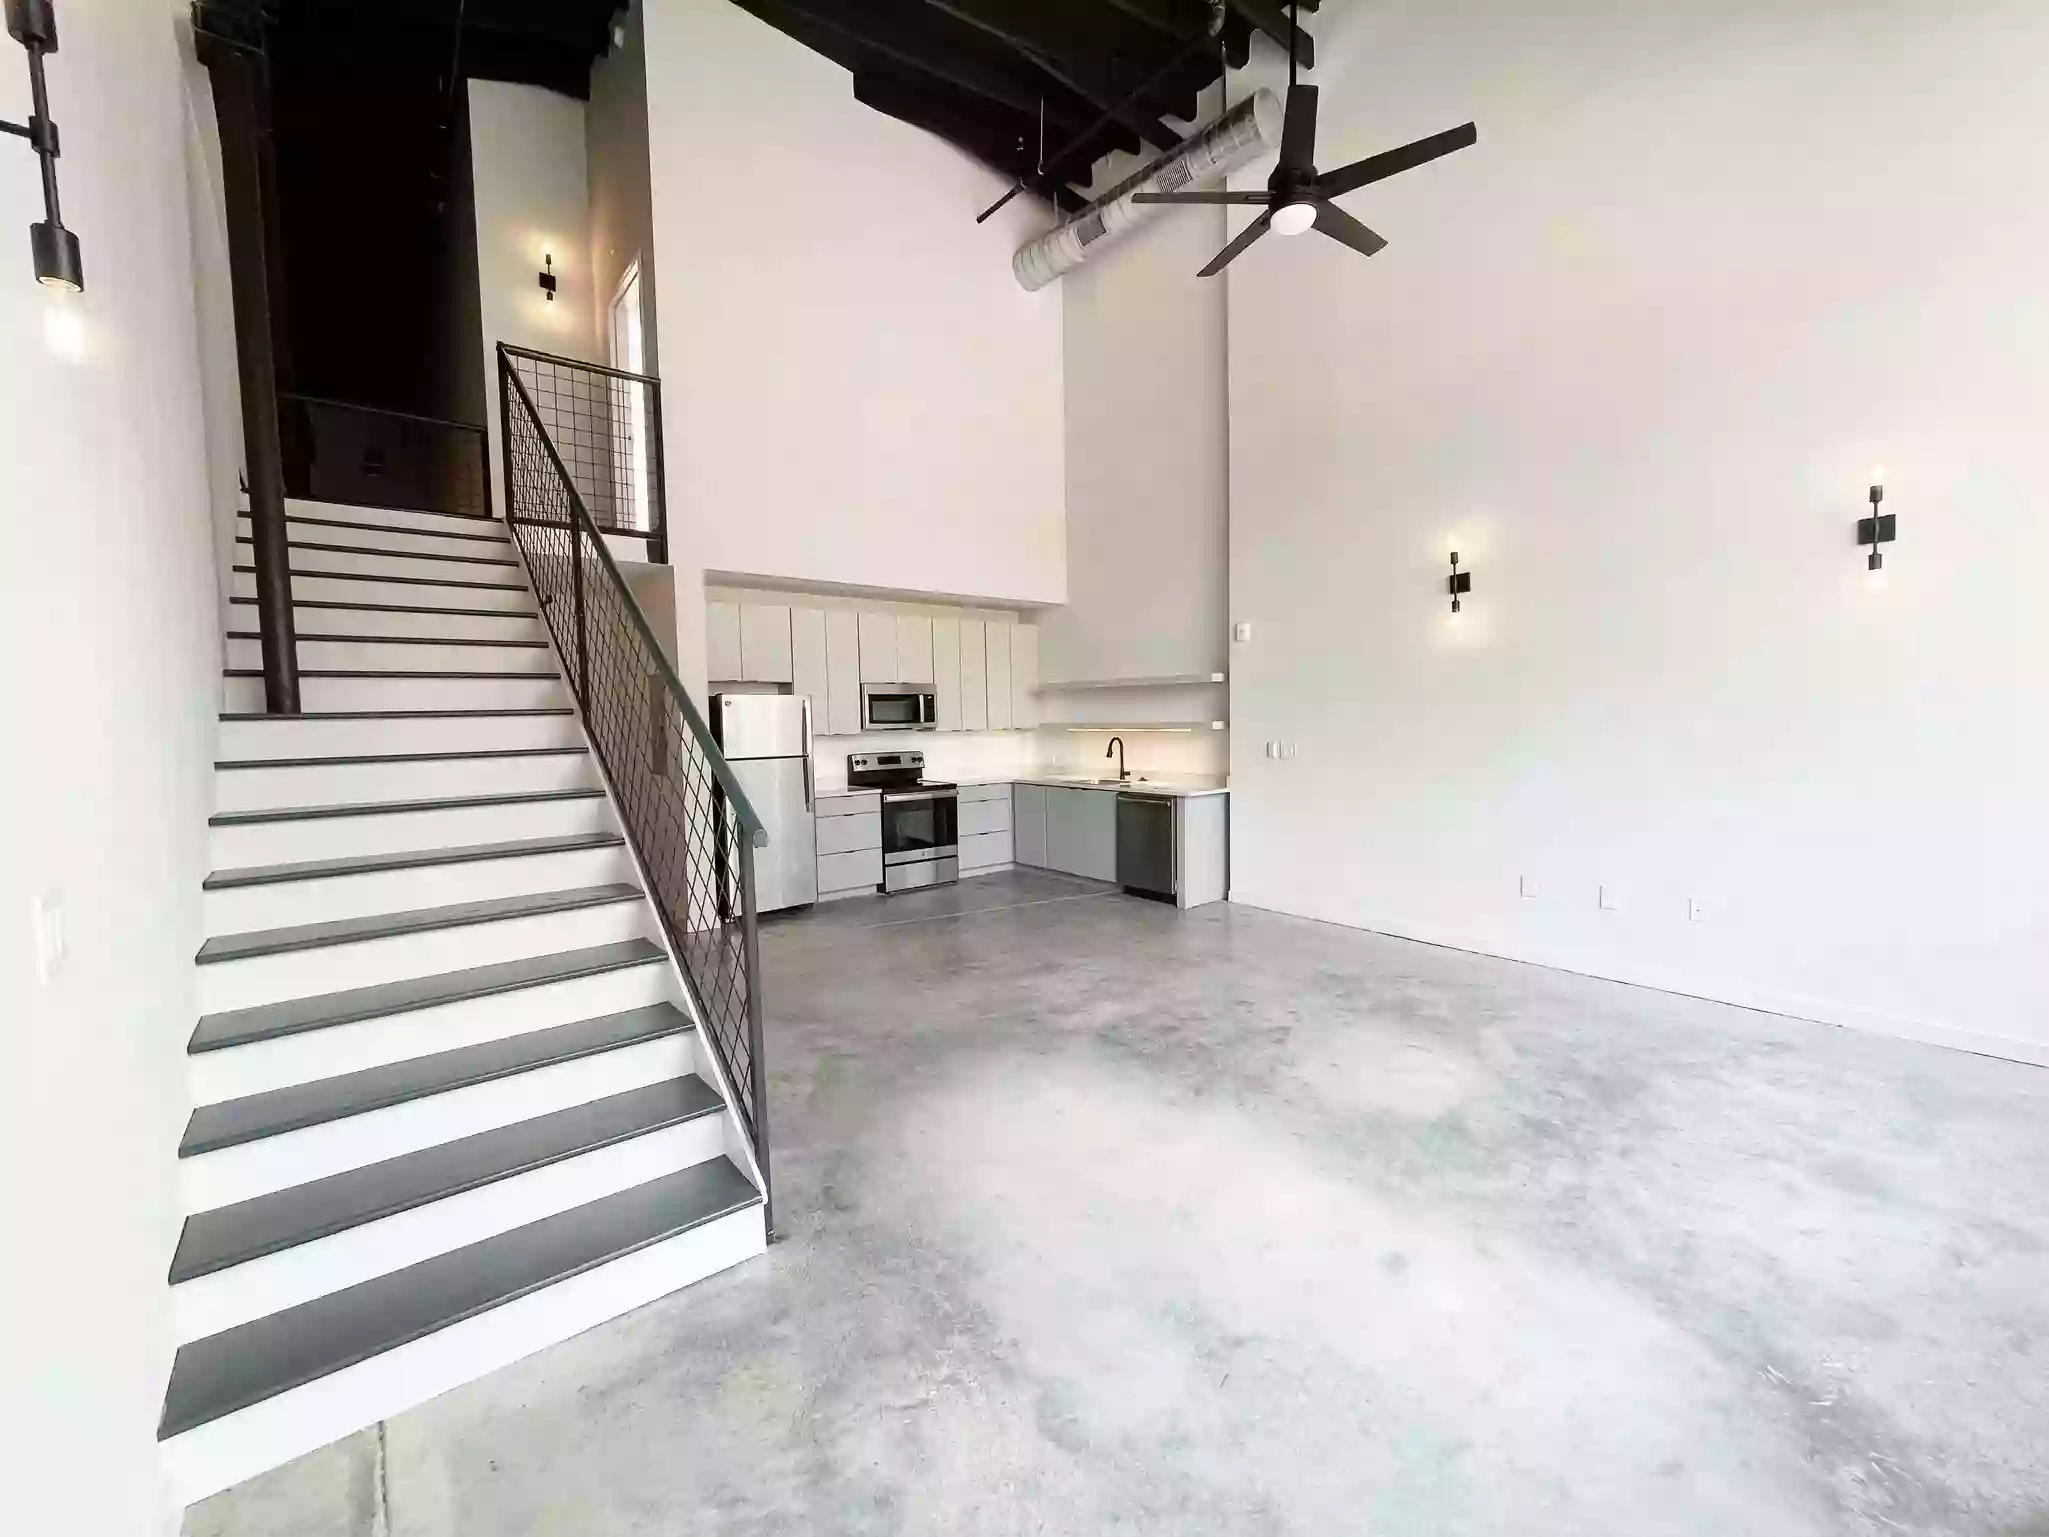 NOW 193- Downtown Dothan Luxury Lofts